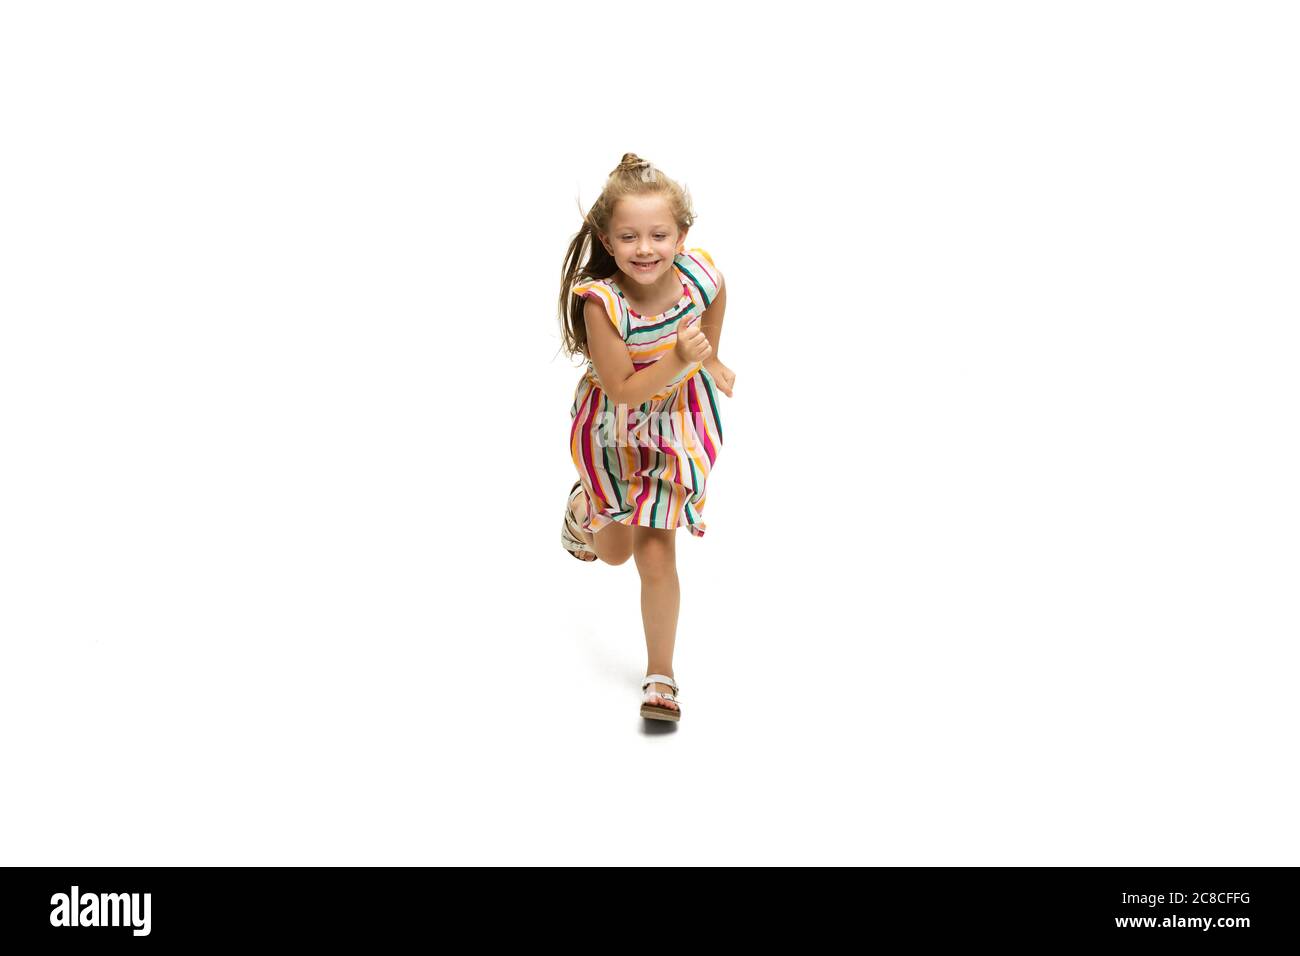 Happy child, little and emotional caucasian girl jumping and running isolated on white background. Looks happy, cheerful, sincere. Copyspace for ad. Childhood, education, happiness concept. Stock Photo